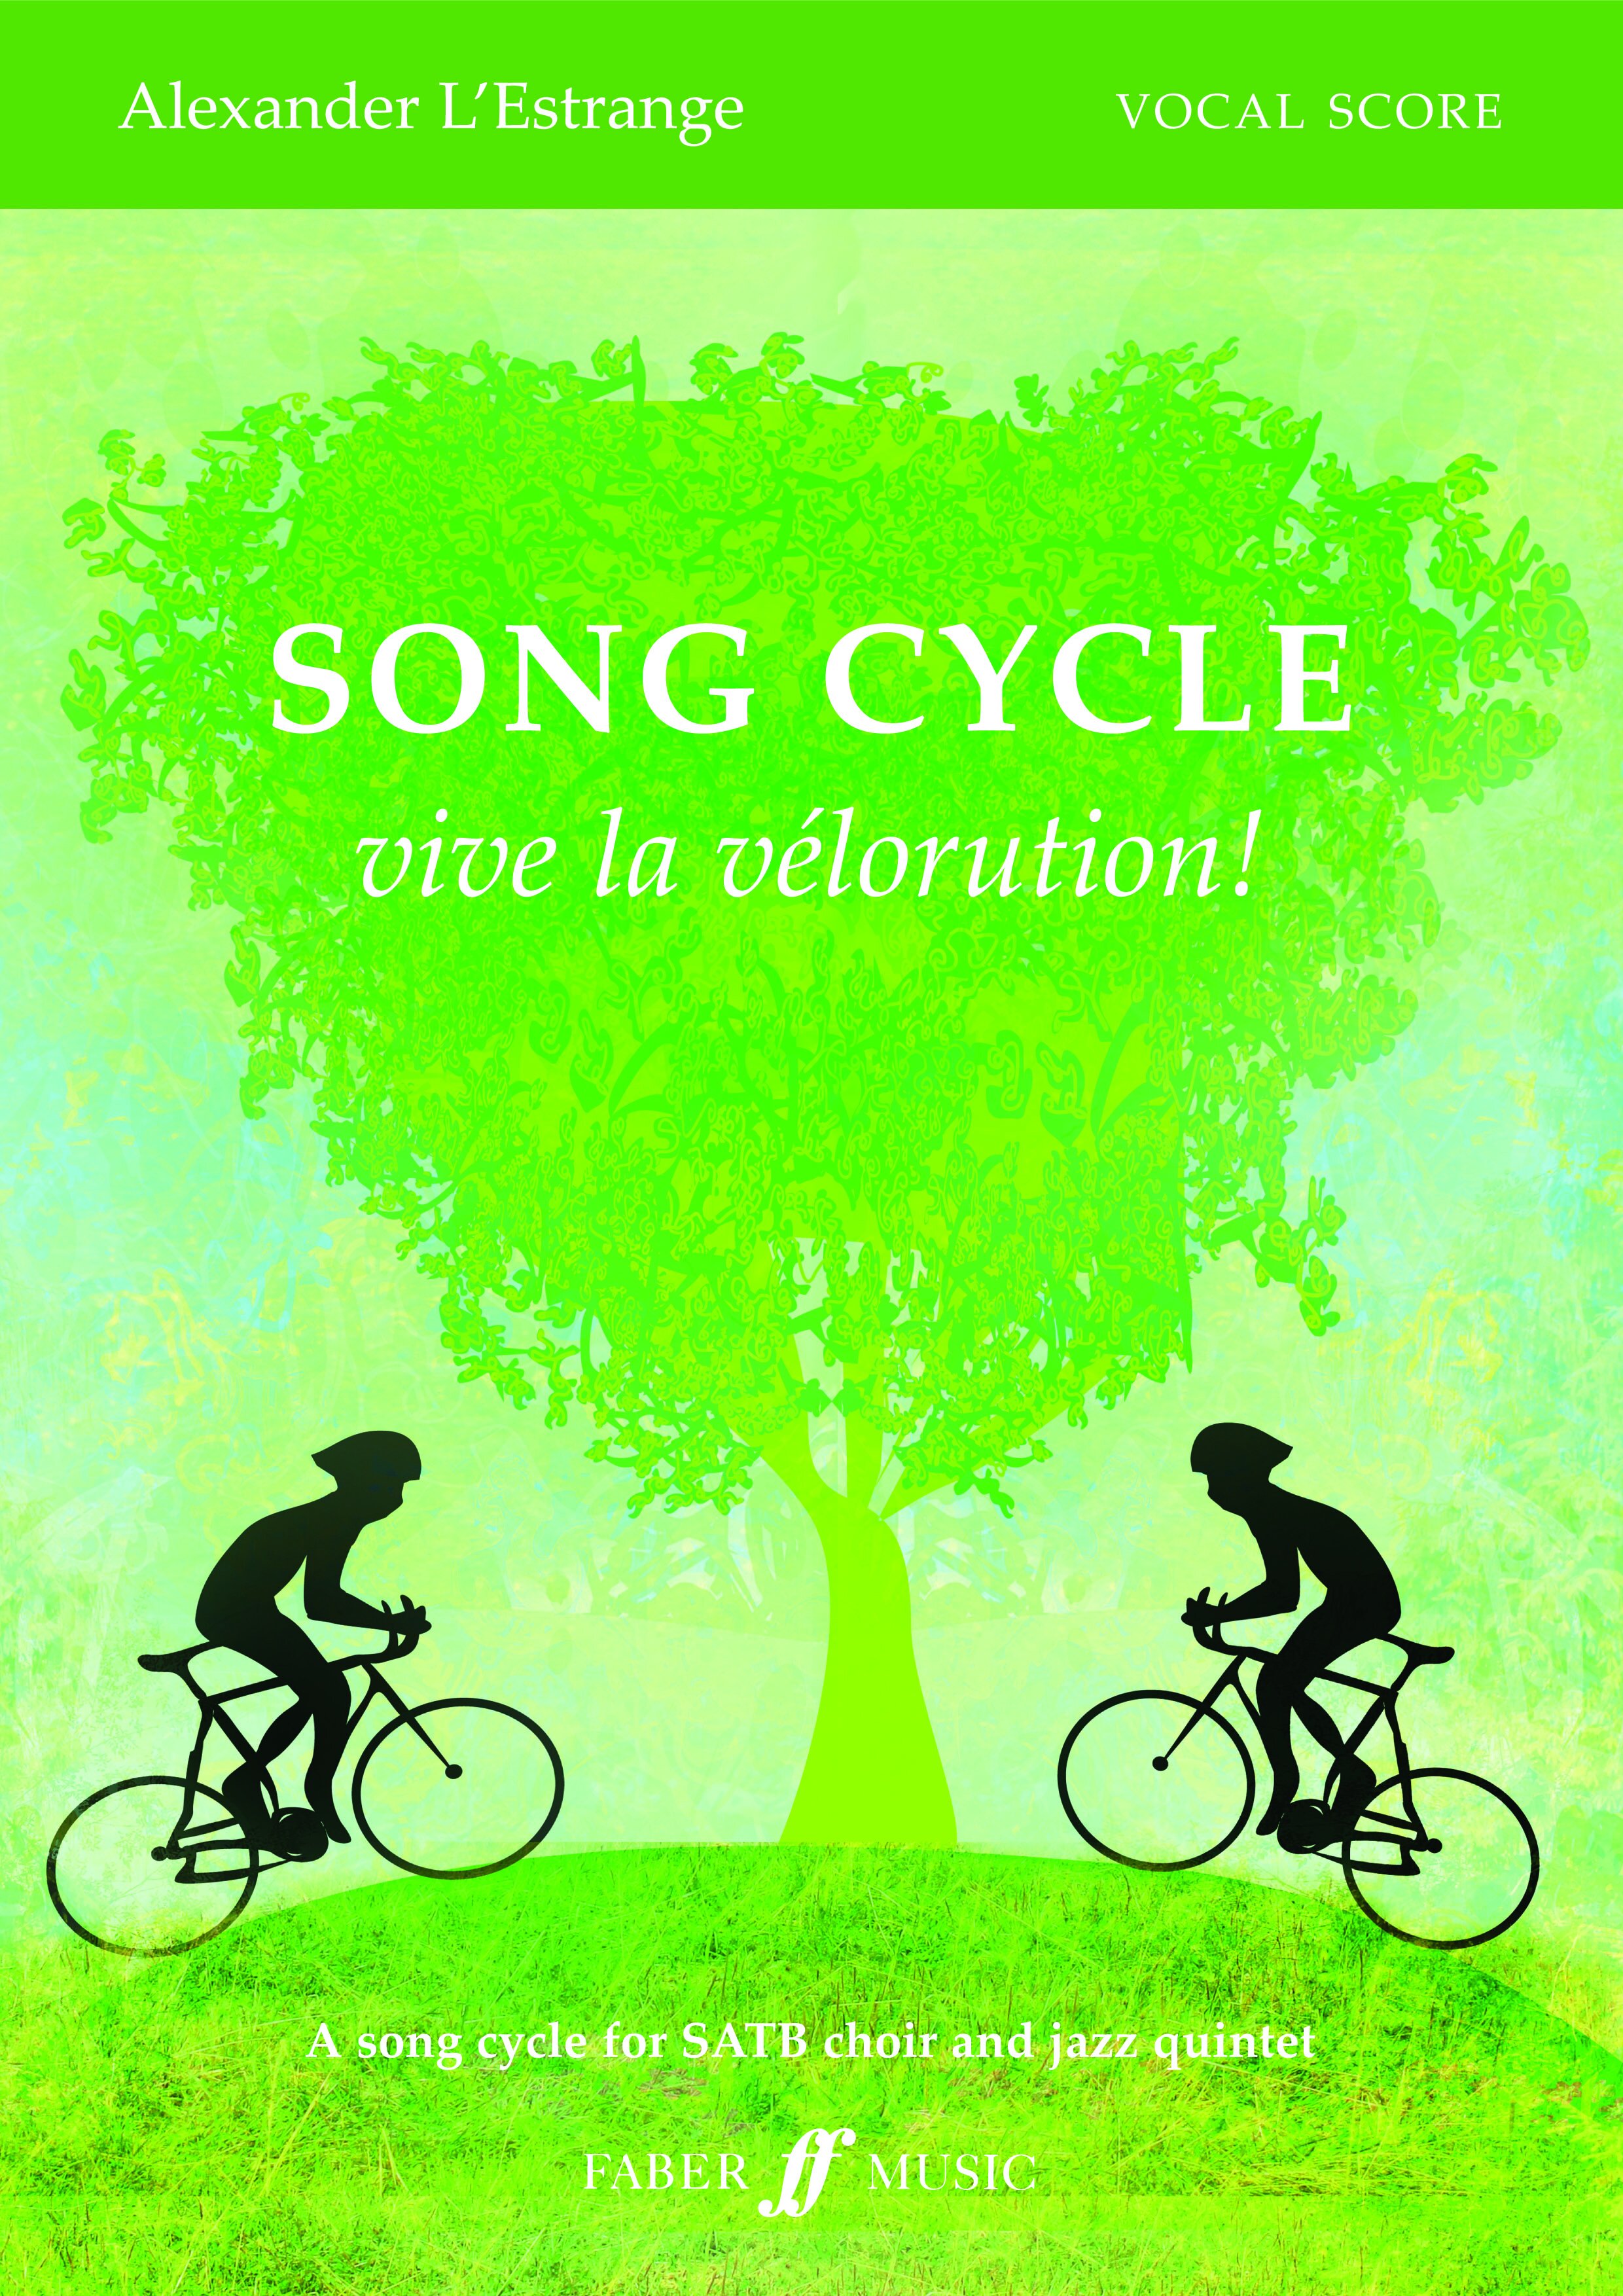 Song Cycle COVER copy.jpg